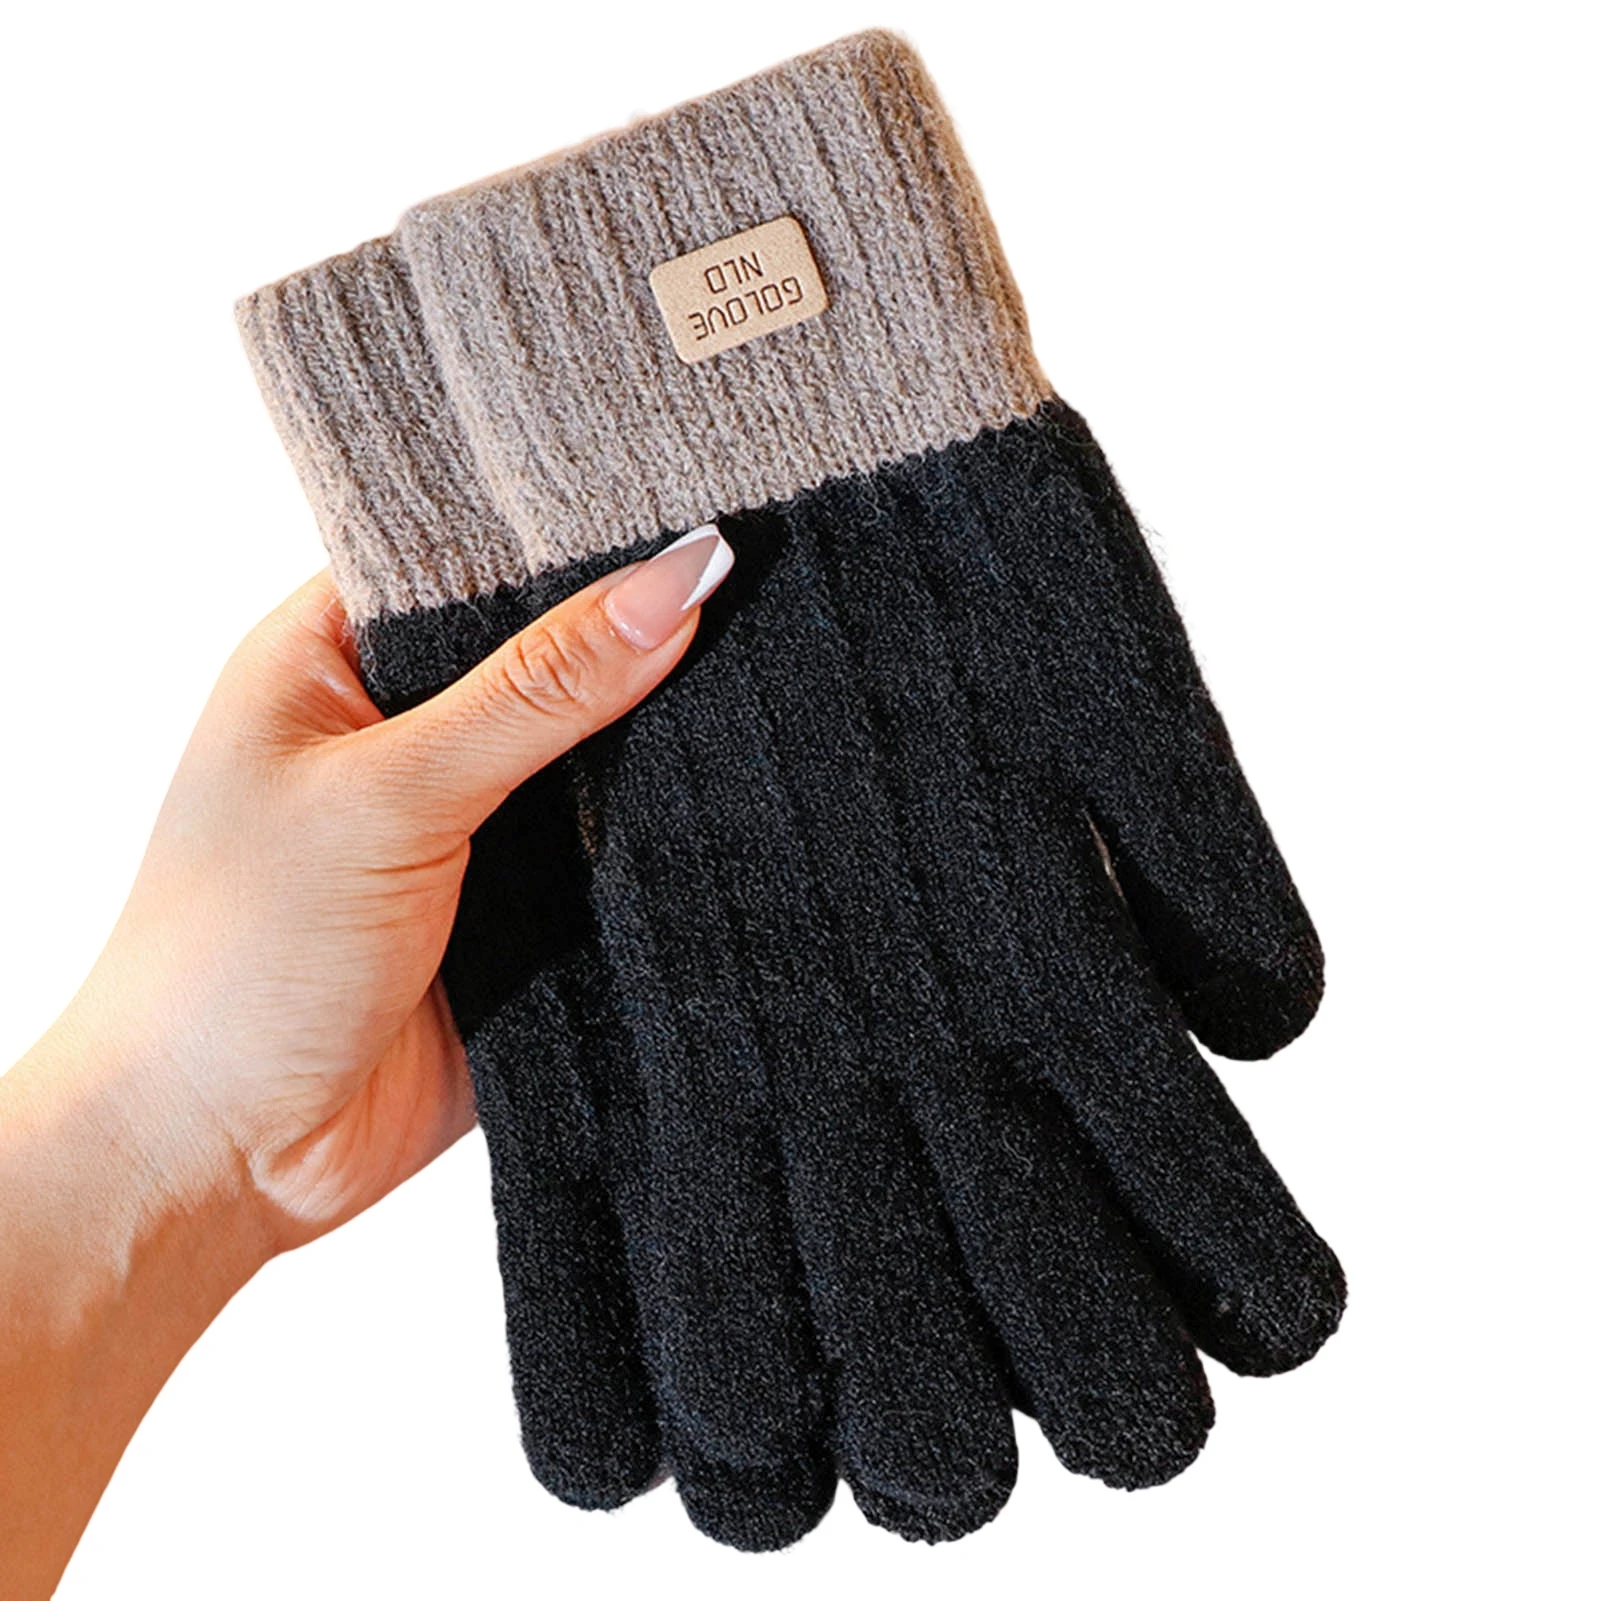 

Unisex Cycling Knit Winter Gloves Warm Fleece Lined Knit Gloves with Touchscreen for Cold Weather Protect Hands